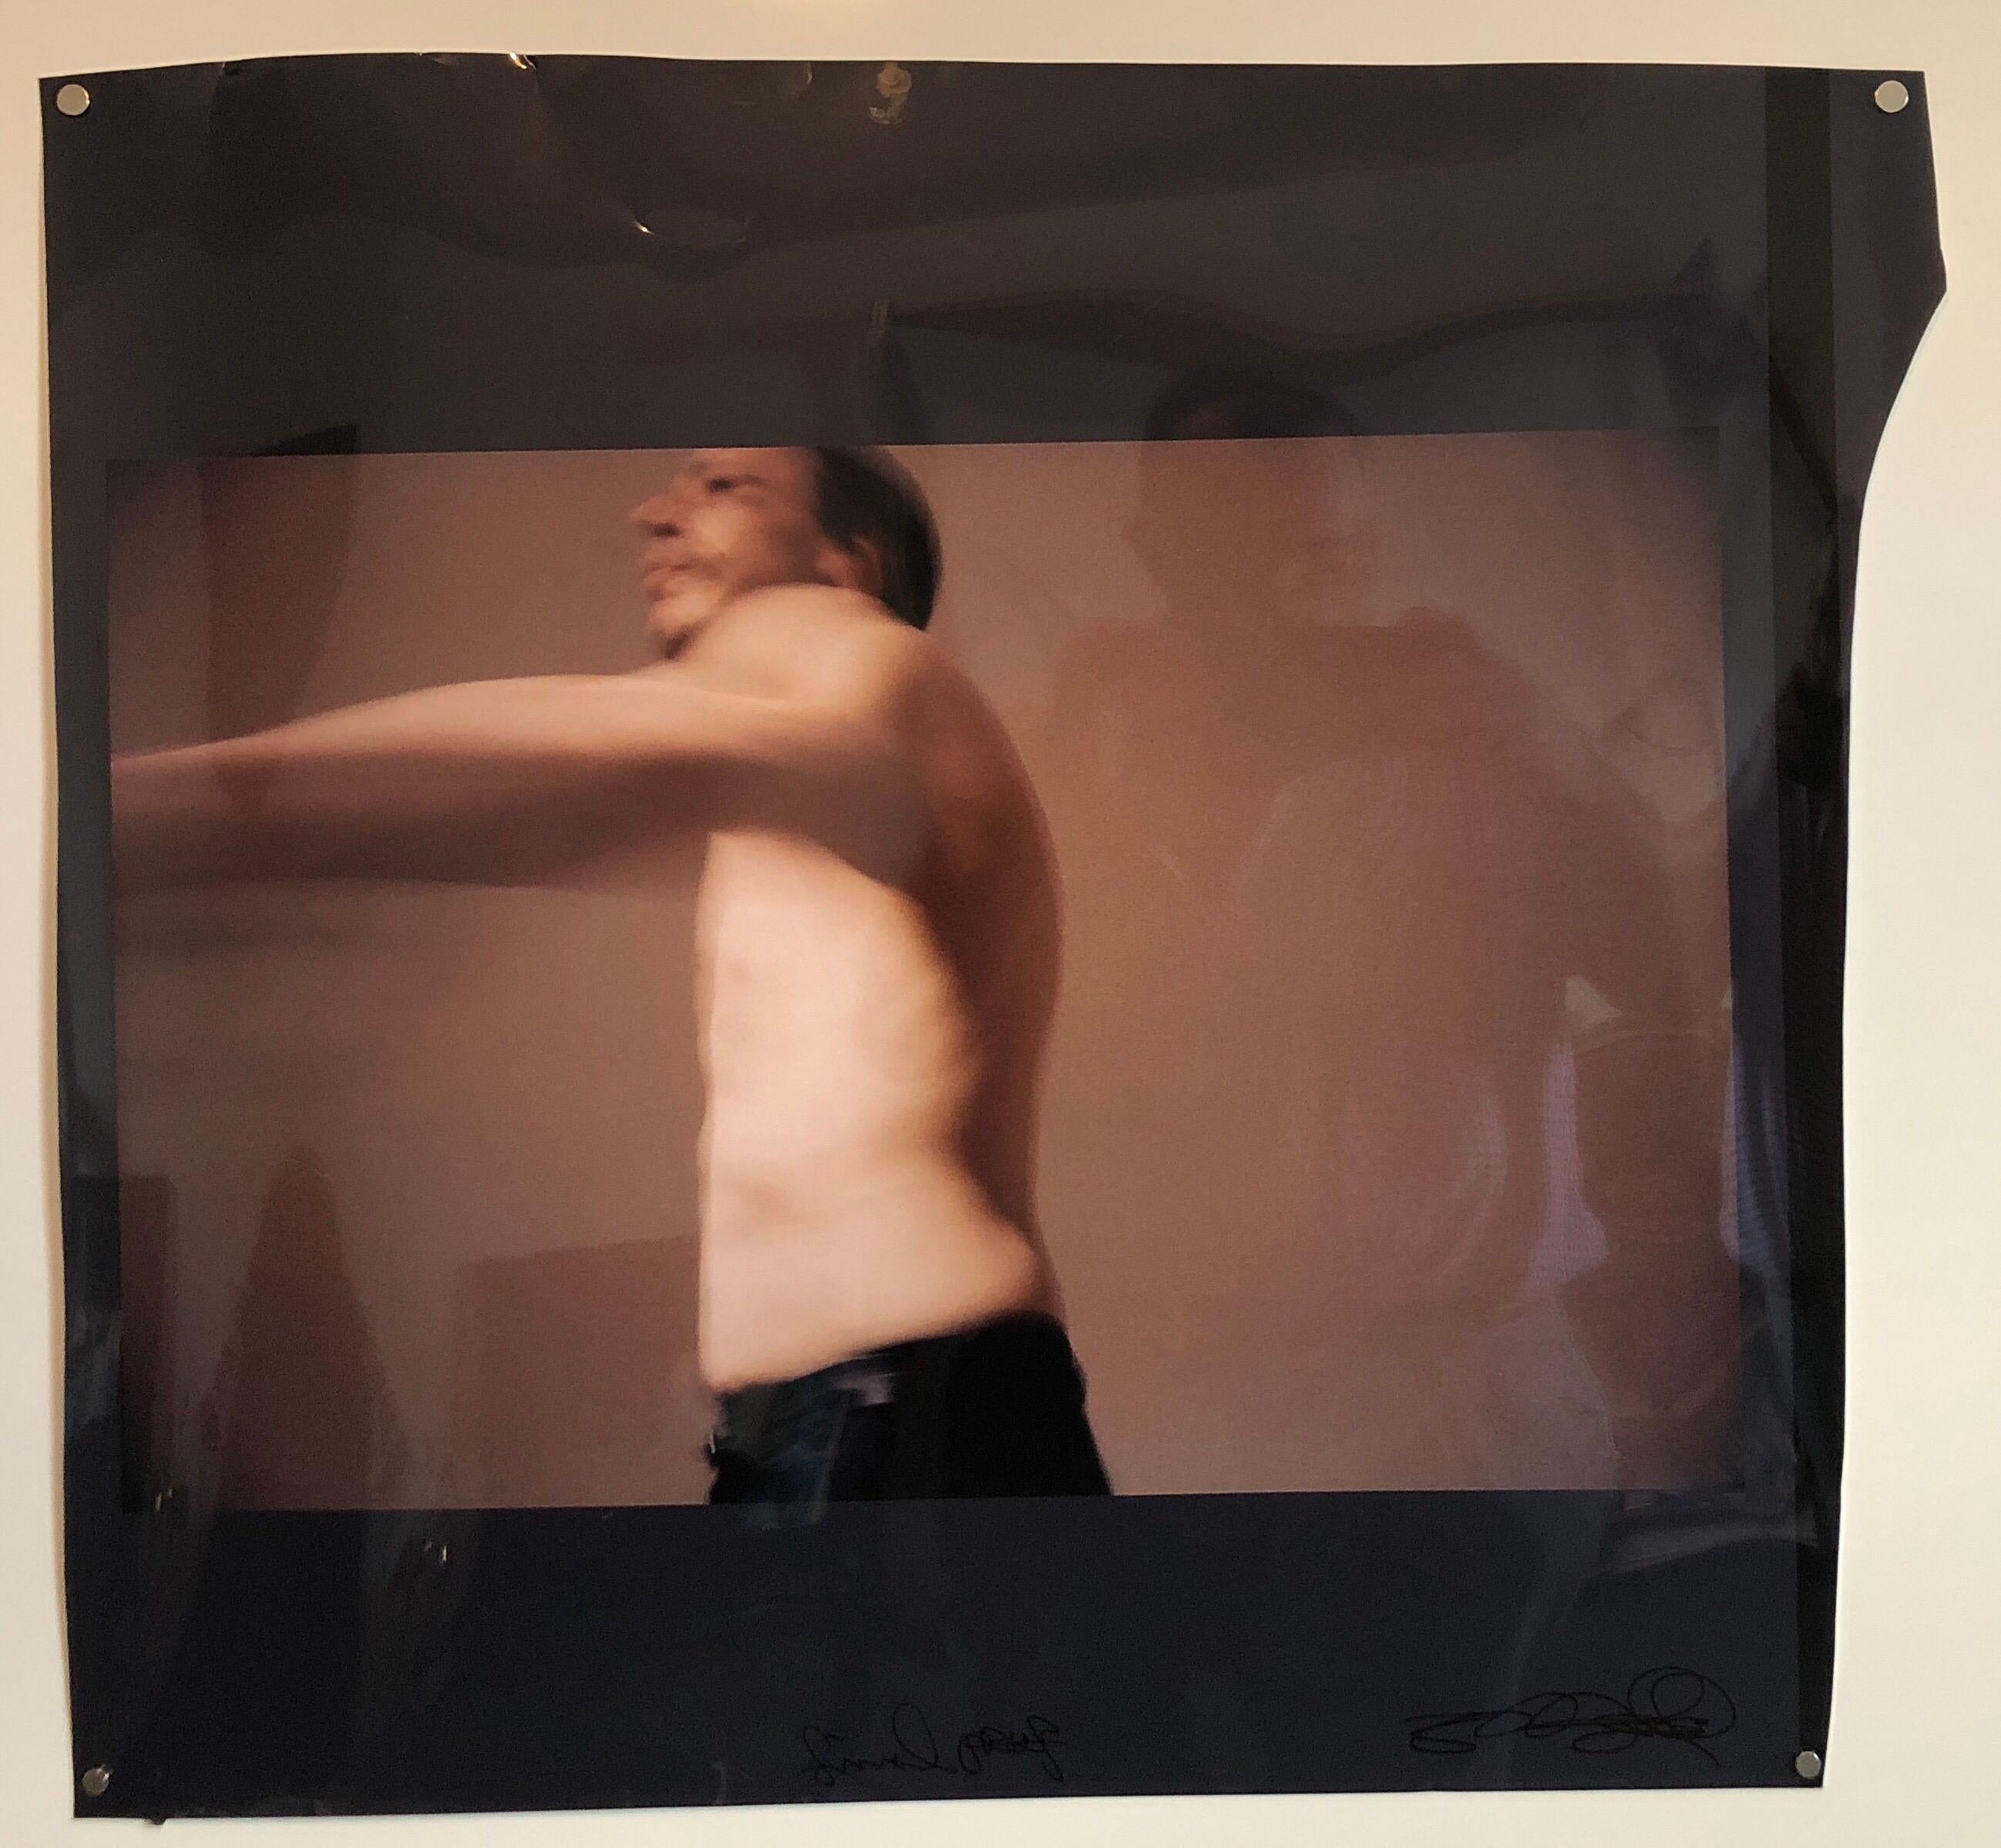 C-print on pearlescent photographic paper. Signed and inscribed Final Proof. Unevenly cut borders. dancing shirtless sideways with arm out.

Skip Arnold was born in Binghamton, New York and currently lives and works in Marseille, France. 
Skip